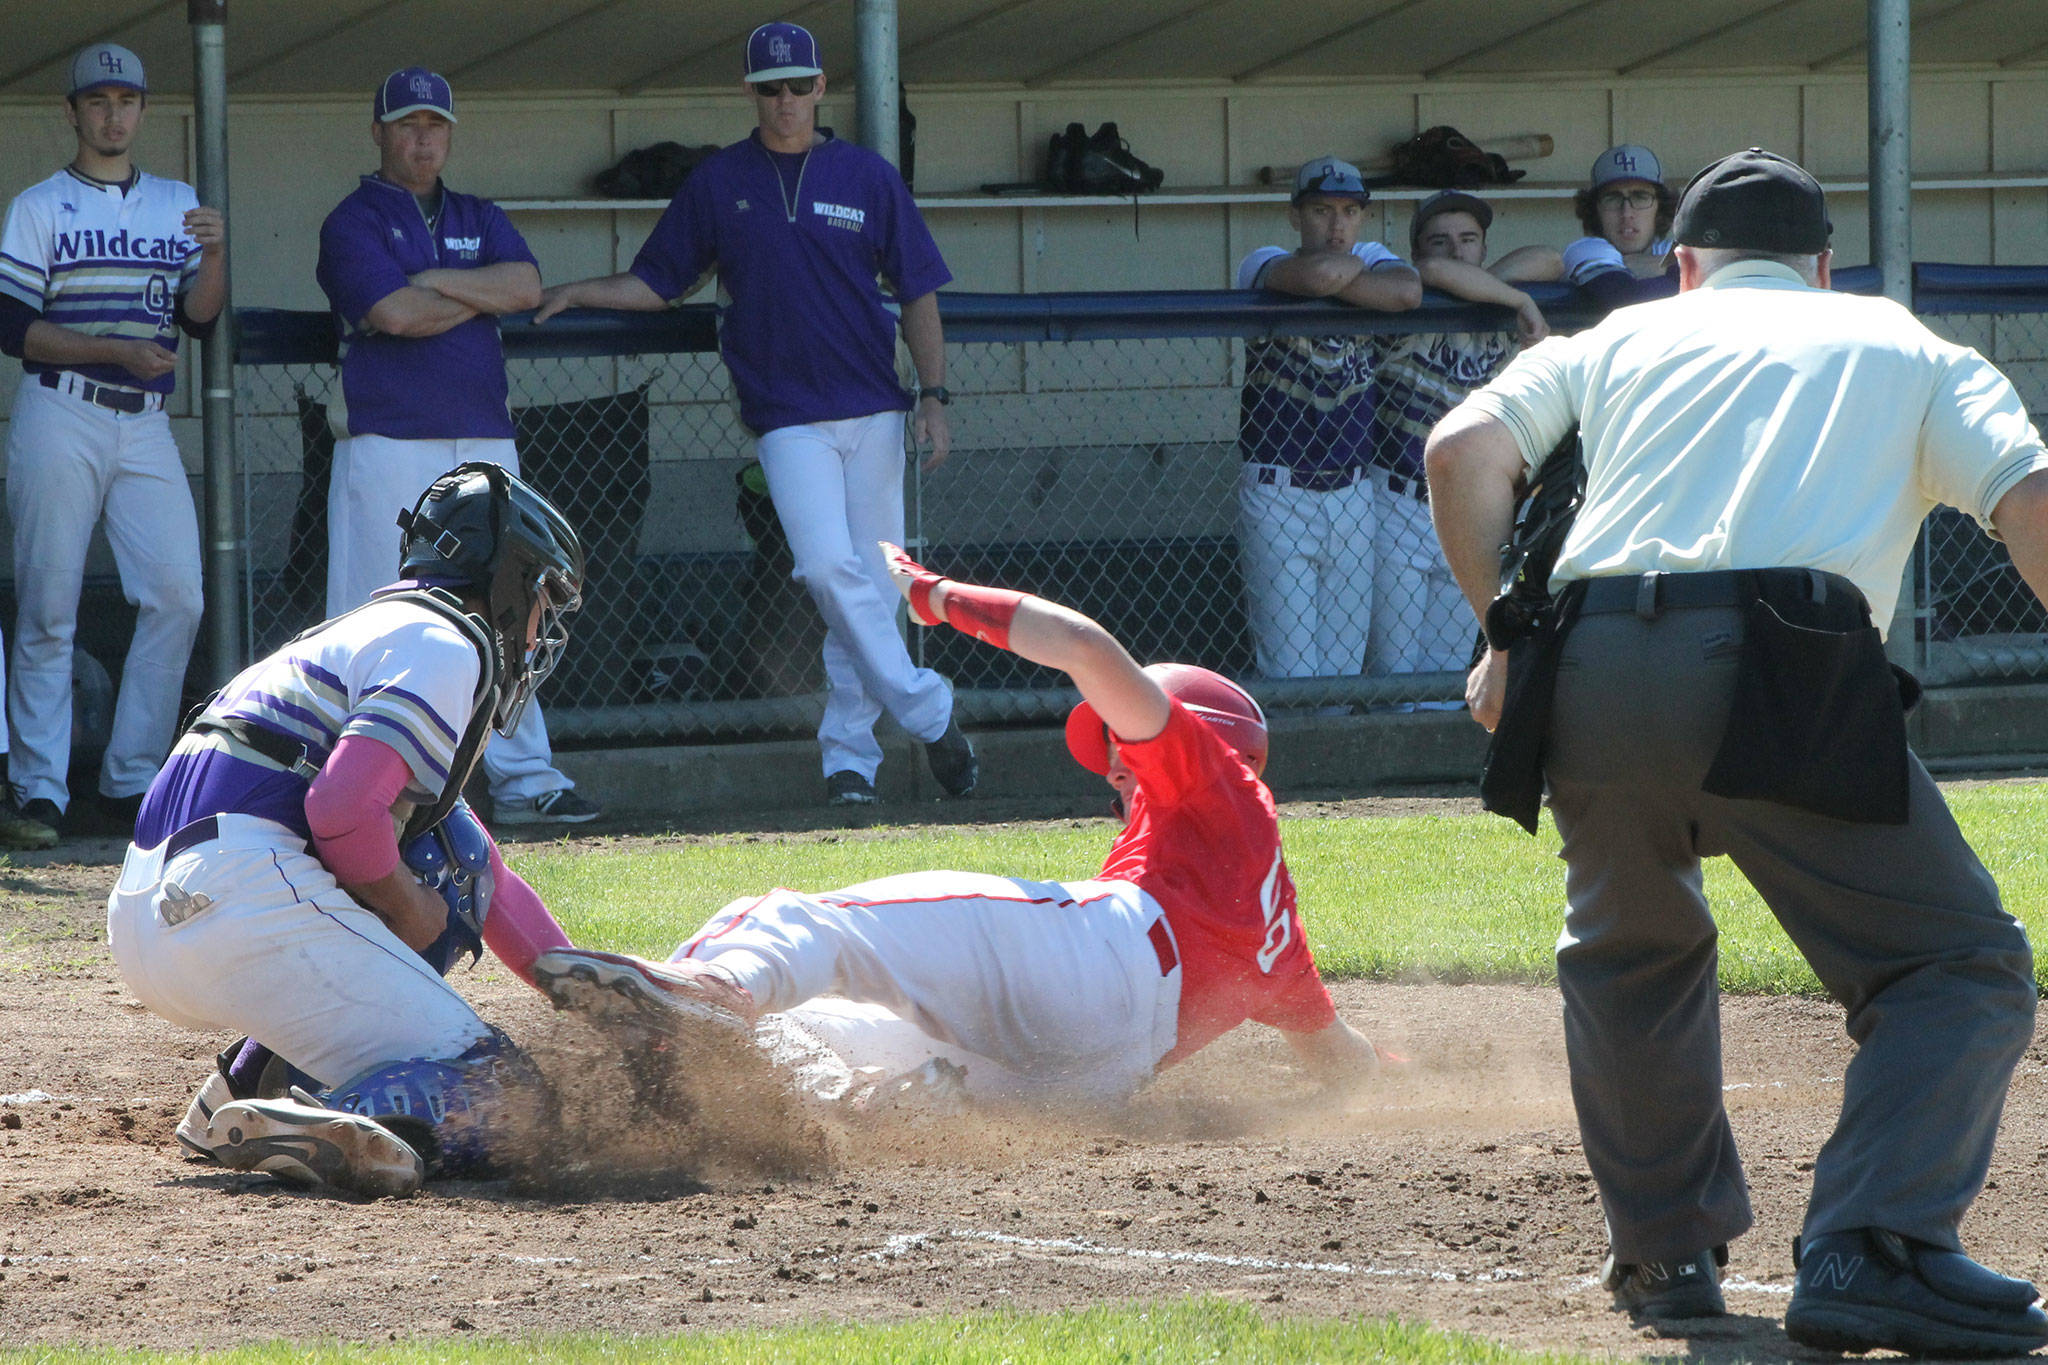 Oak Harbor catcher Aaron Martinez puts the tag on Coupeville’s Gavin Knoblich in Saturday’s tournament game in Anacortes. (Photo by Jim Waller/Whidbey News-Times)